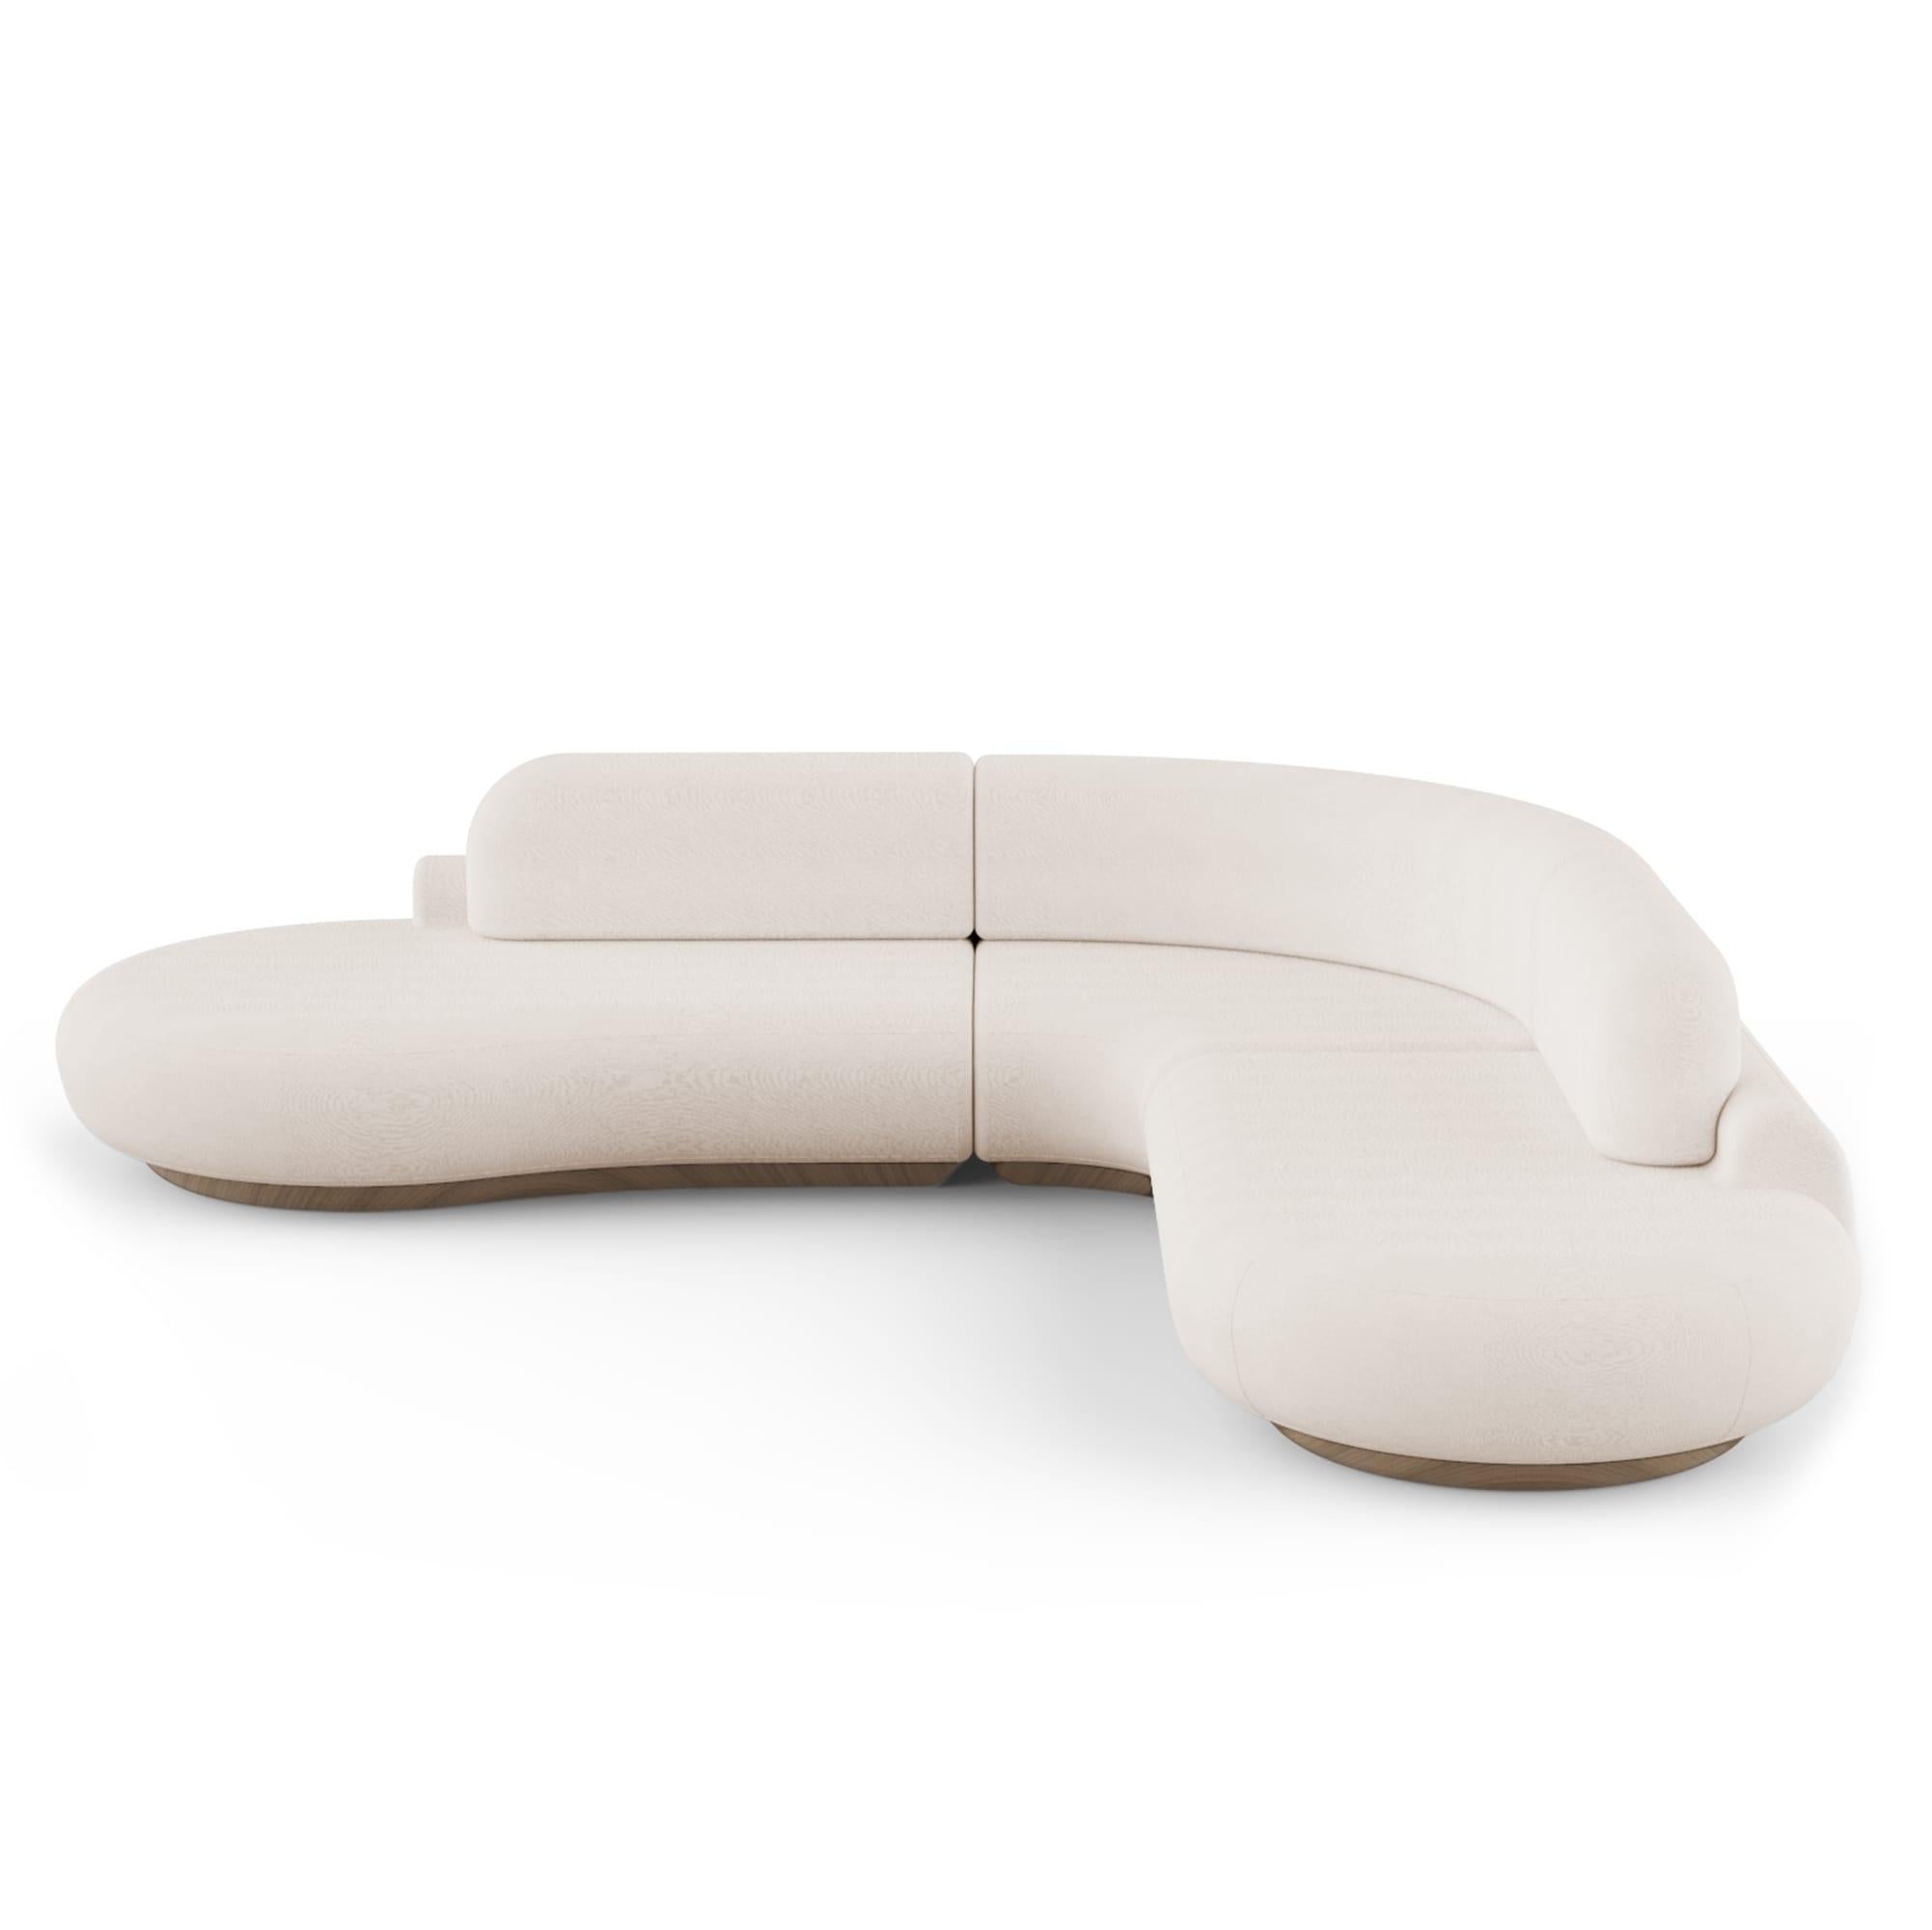 Naked sofa by DOOQ
Dimensions: W 312 x D 332 x H 78 cm.
 Seat height 40 cm.
Materials: base beechwood.
 Upholstery smooth velvet 
 Also avalaible in synthetic leather.

Naked sofa reveals sculptural and organic shape meant to embrace the user